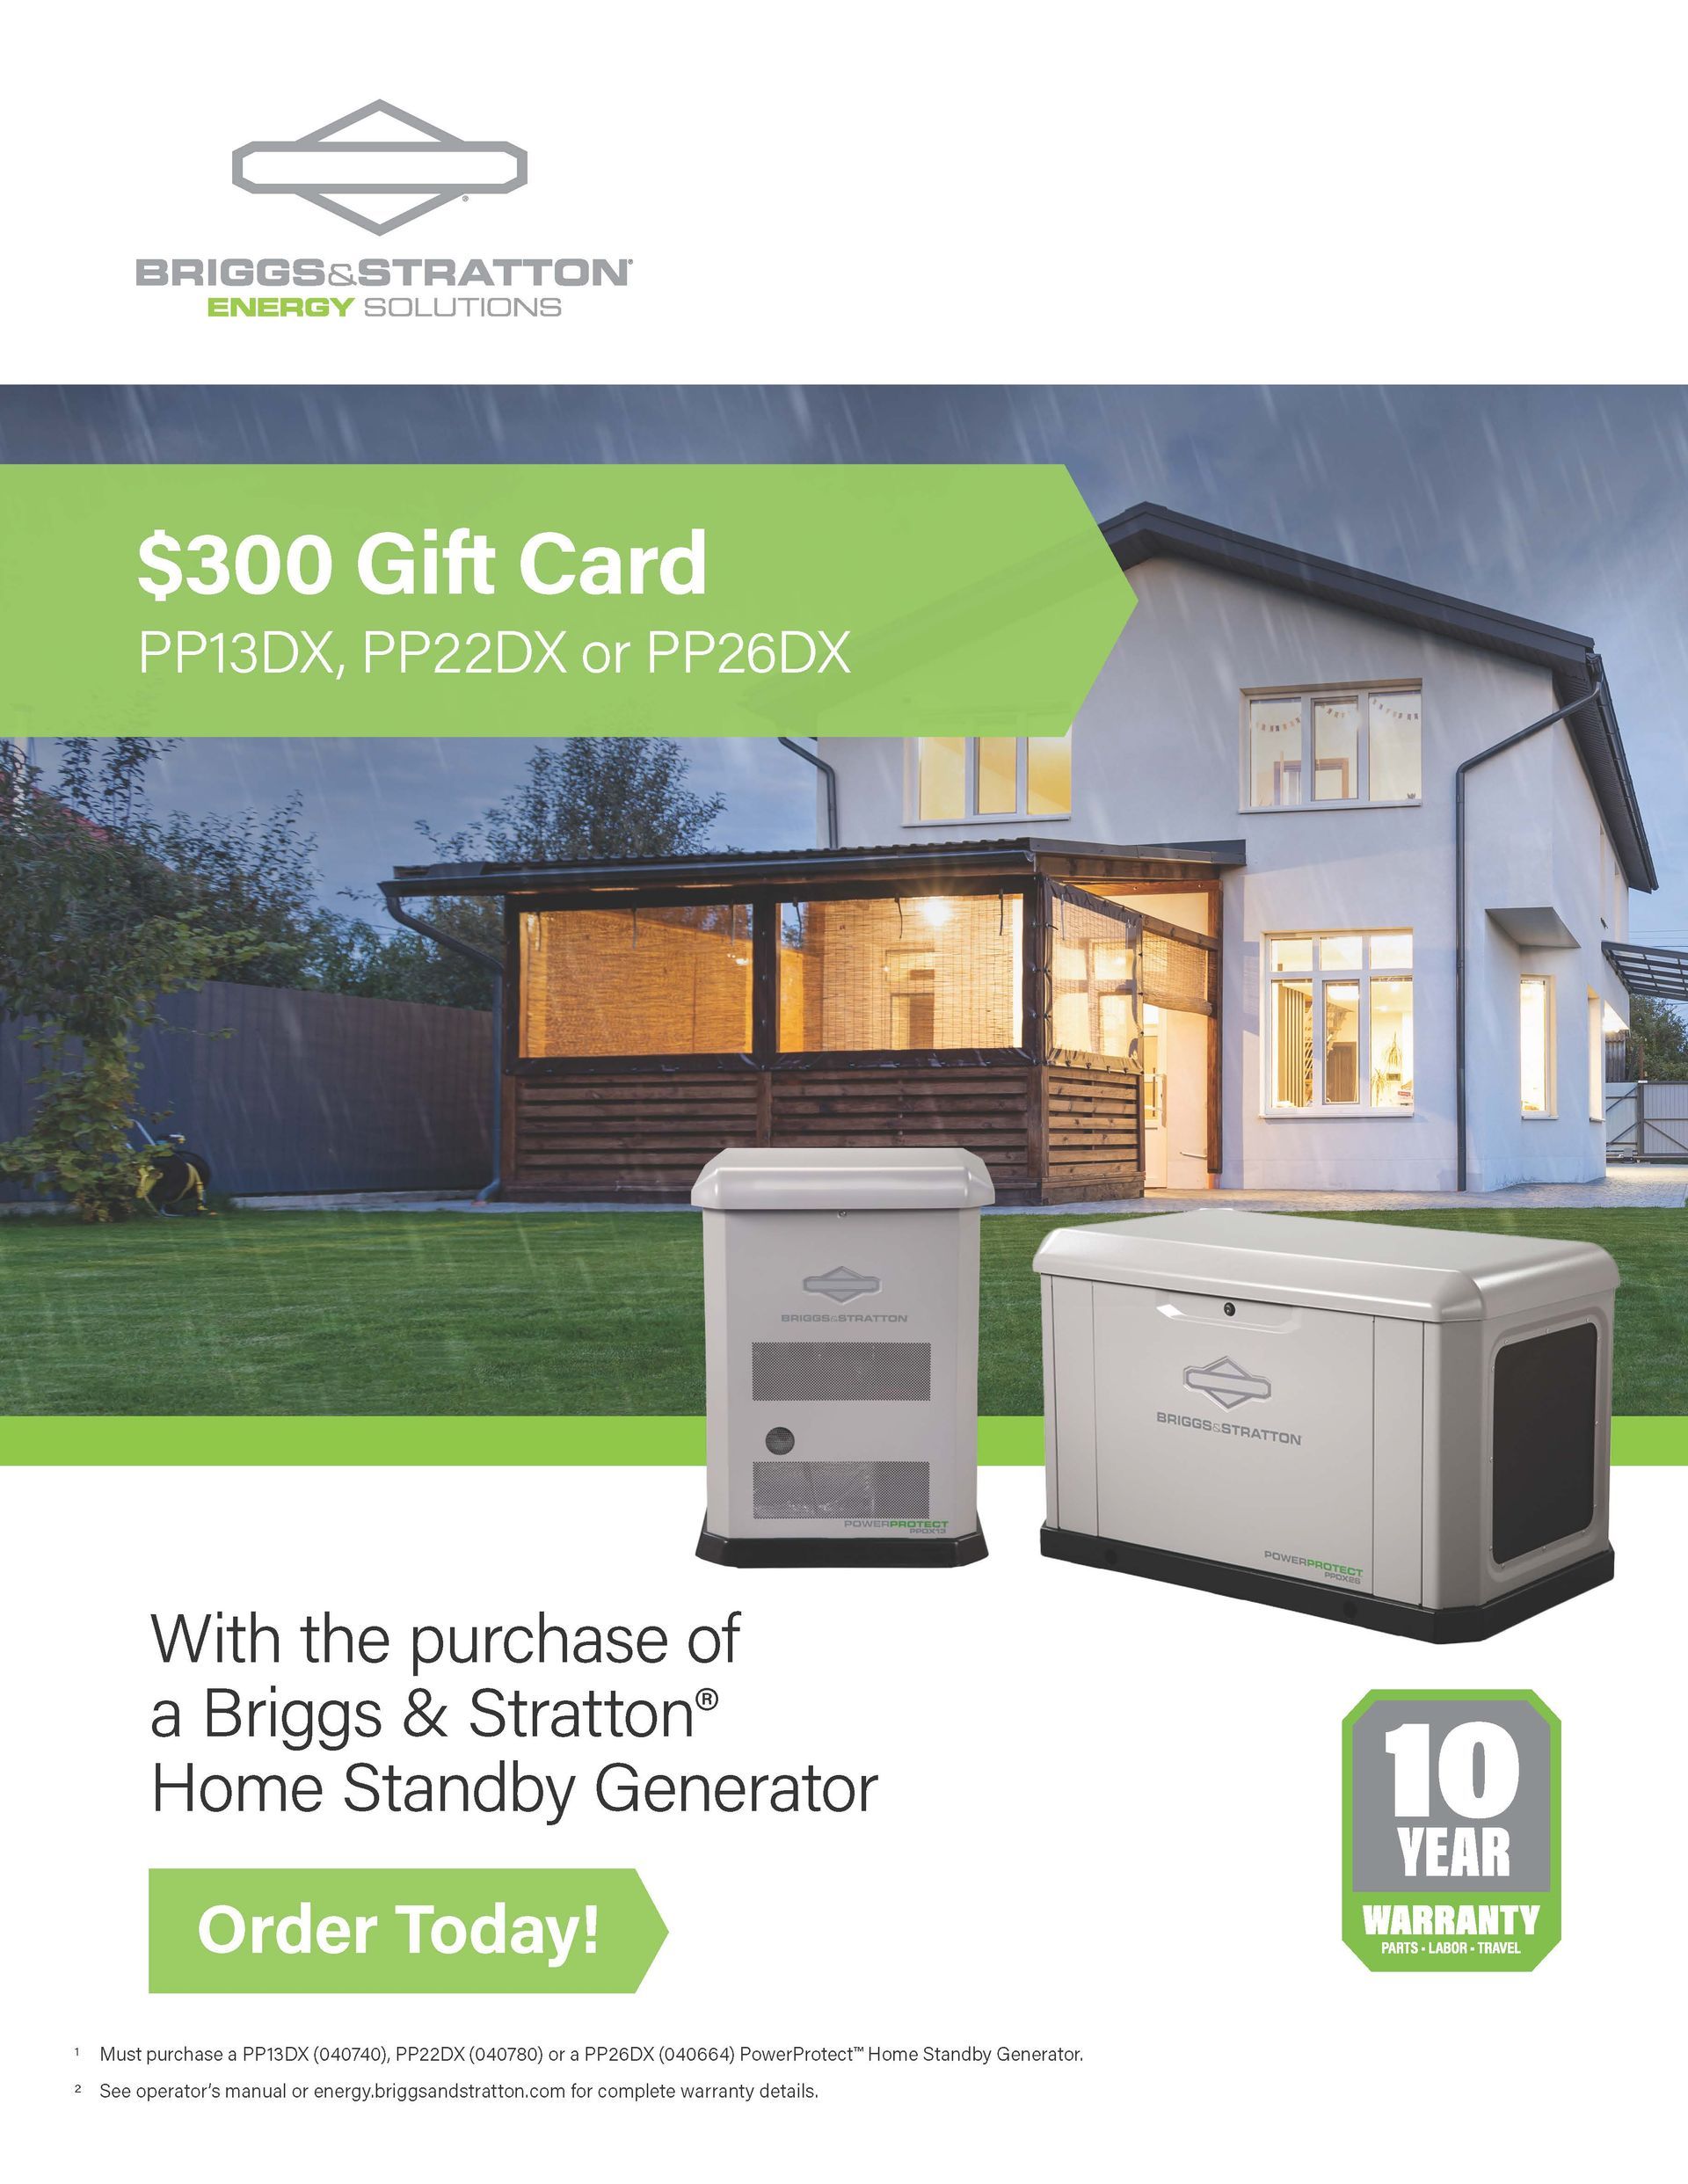 $300 gift card with the purchase of a Briggs & Stratton Home Standby Generator